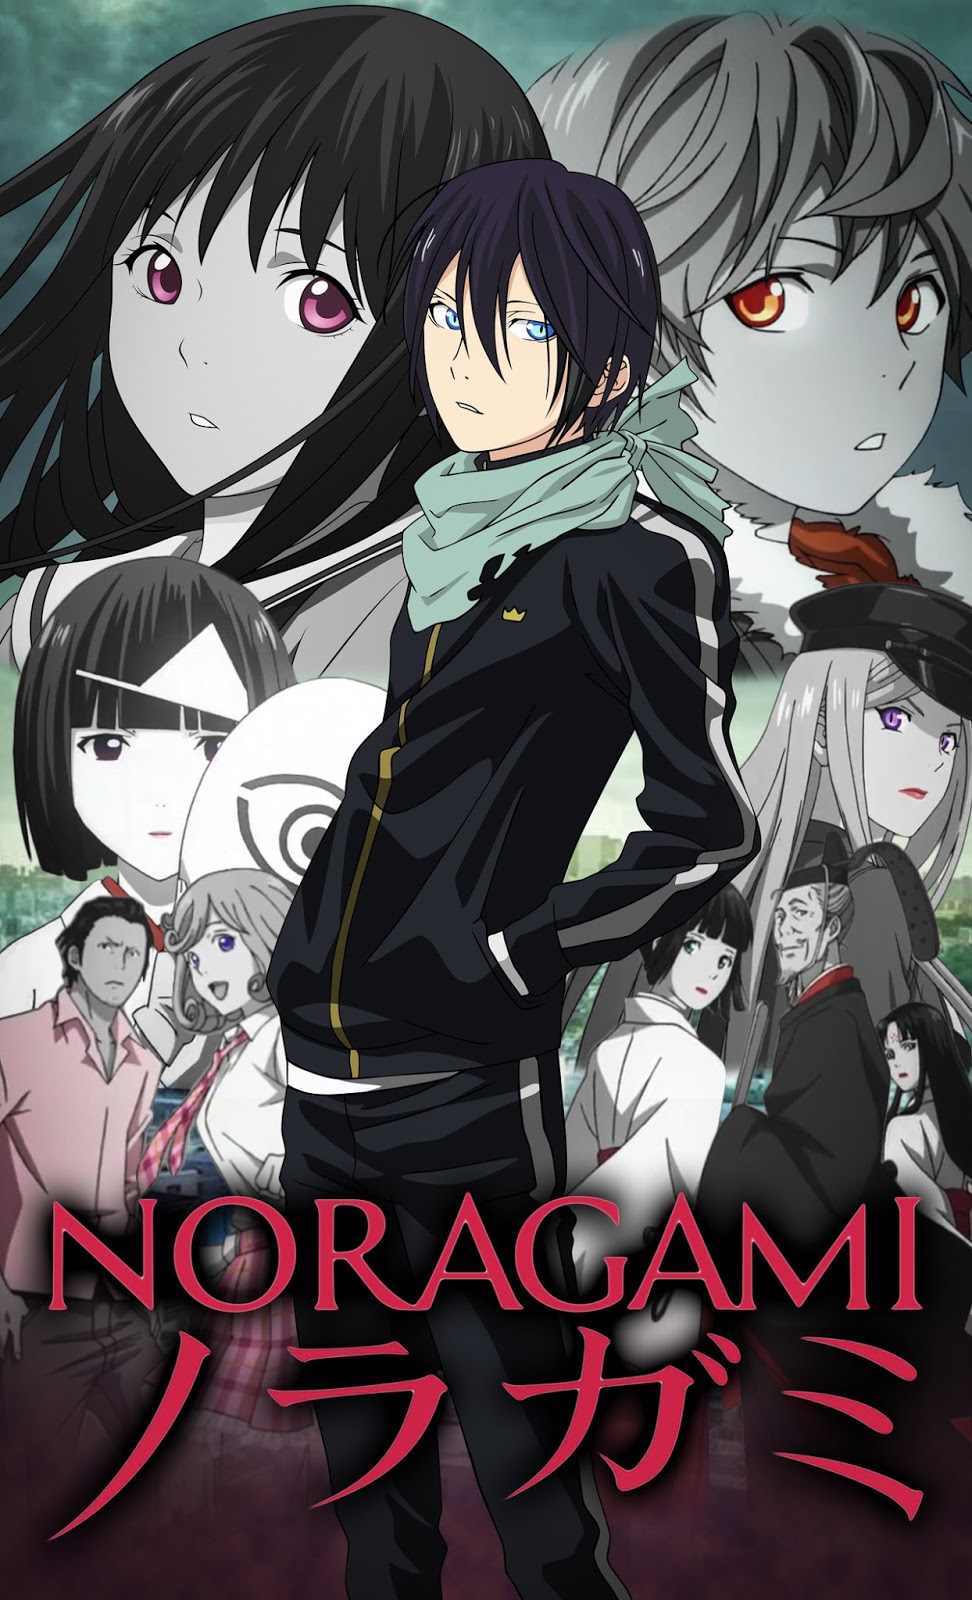 Watch ノラガミ Noragami 第1話 家猫と野良神と尻尾 With Original Japanese Voice And Interactive Subtitles